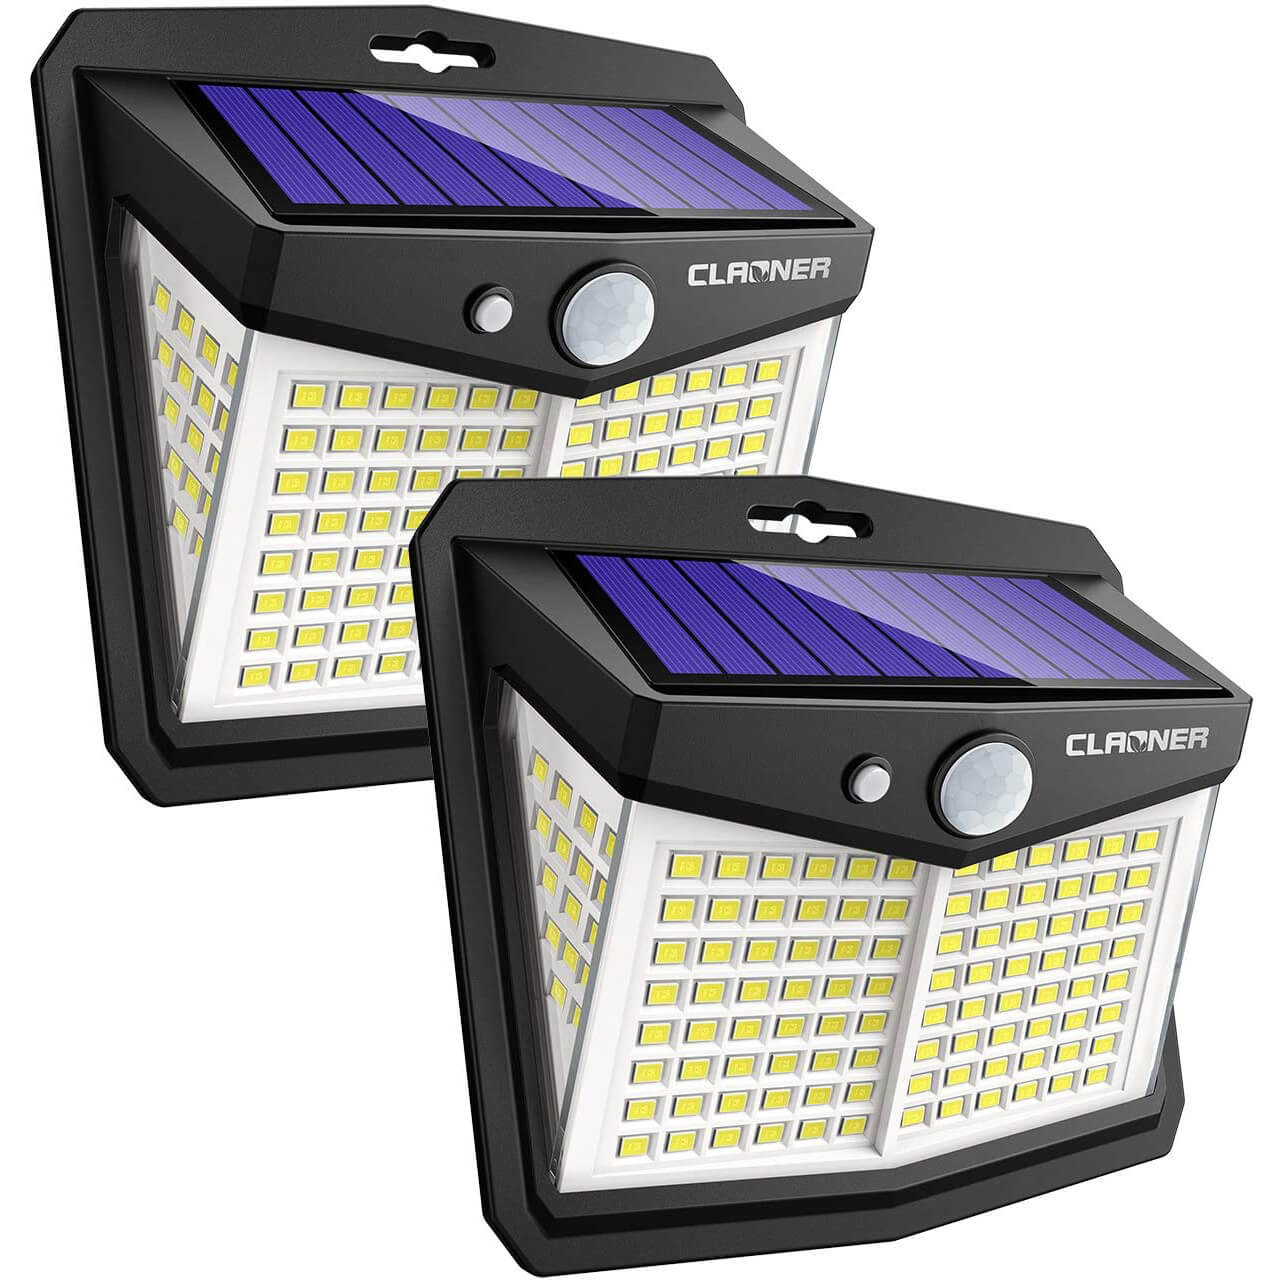 CLEANER Outdoor Solar Security Lights